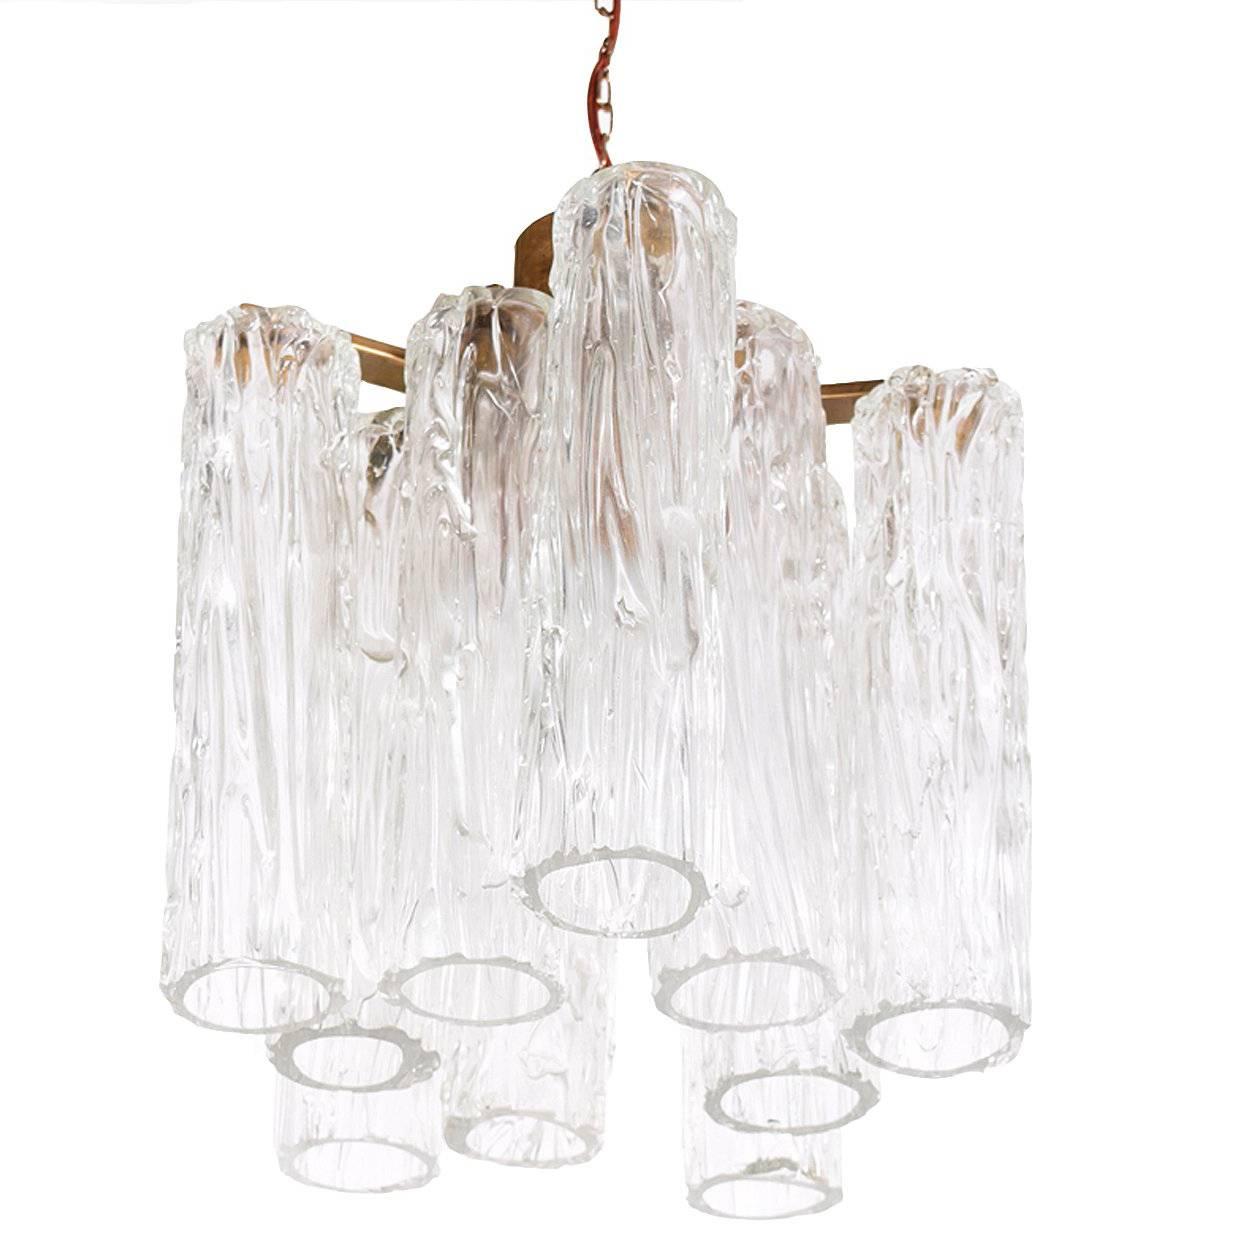 1940s Murano Chandelier Attributed to Barovier & Toso For Sale